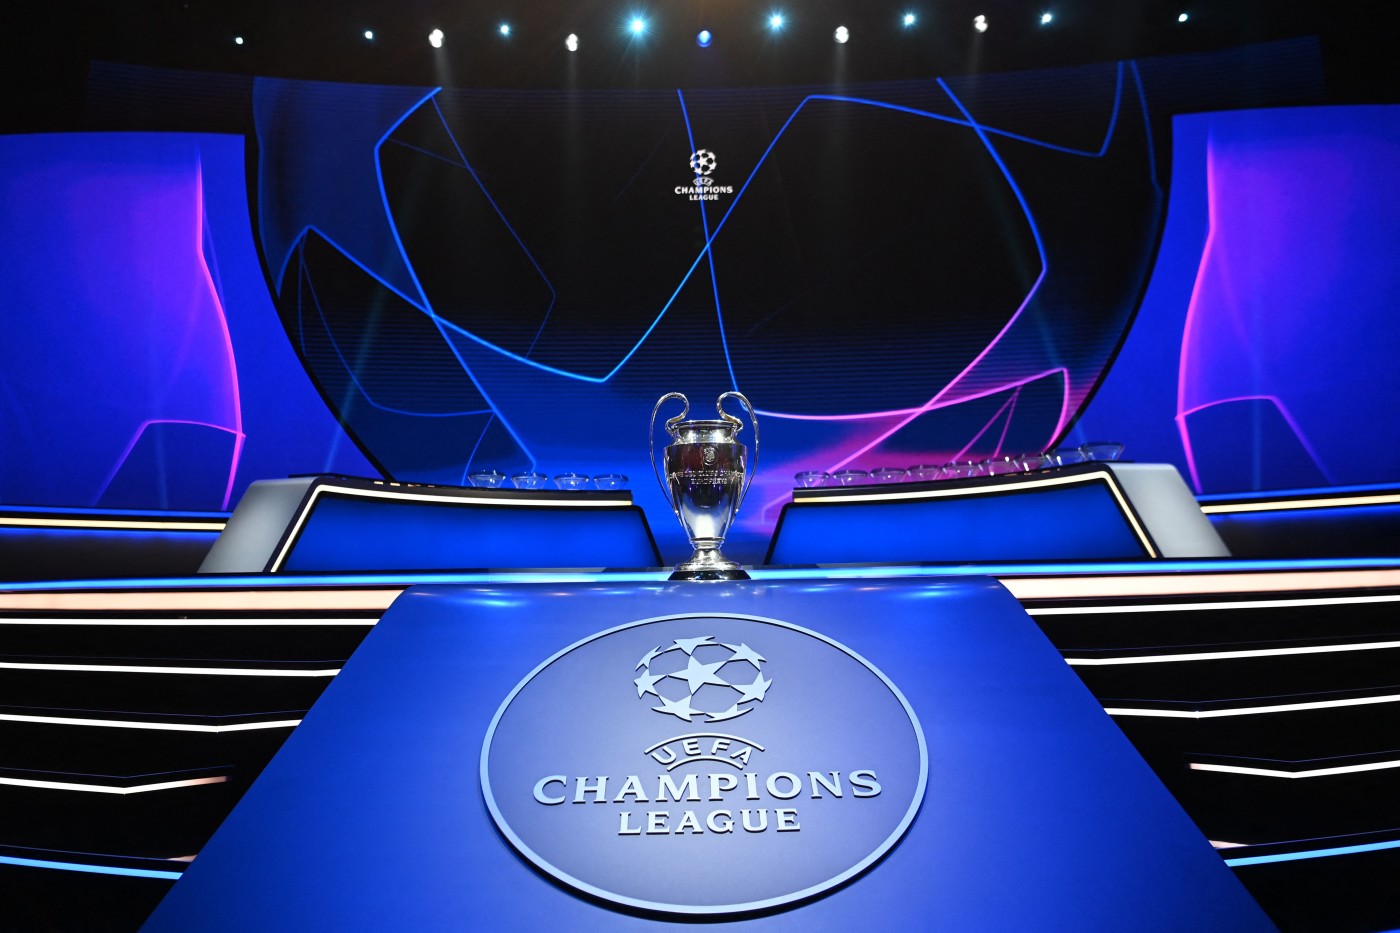 UEFA Champions League quarter-final, semi-final and final draws: When were  they, where were they, who was involved? | UEFA Champions League | UEFA.com